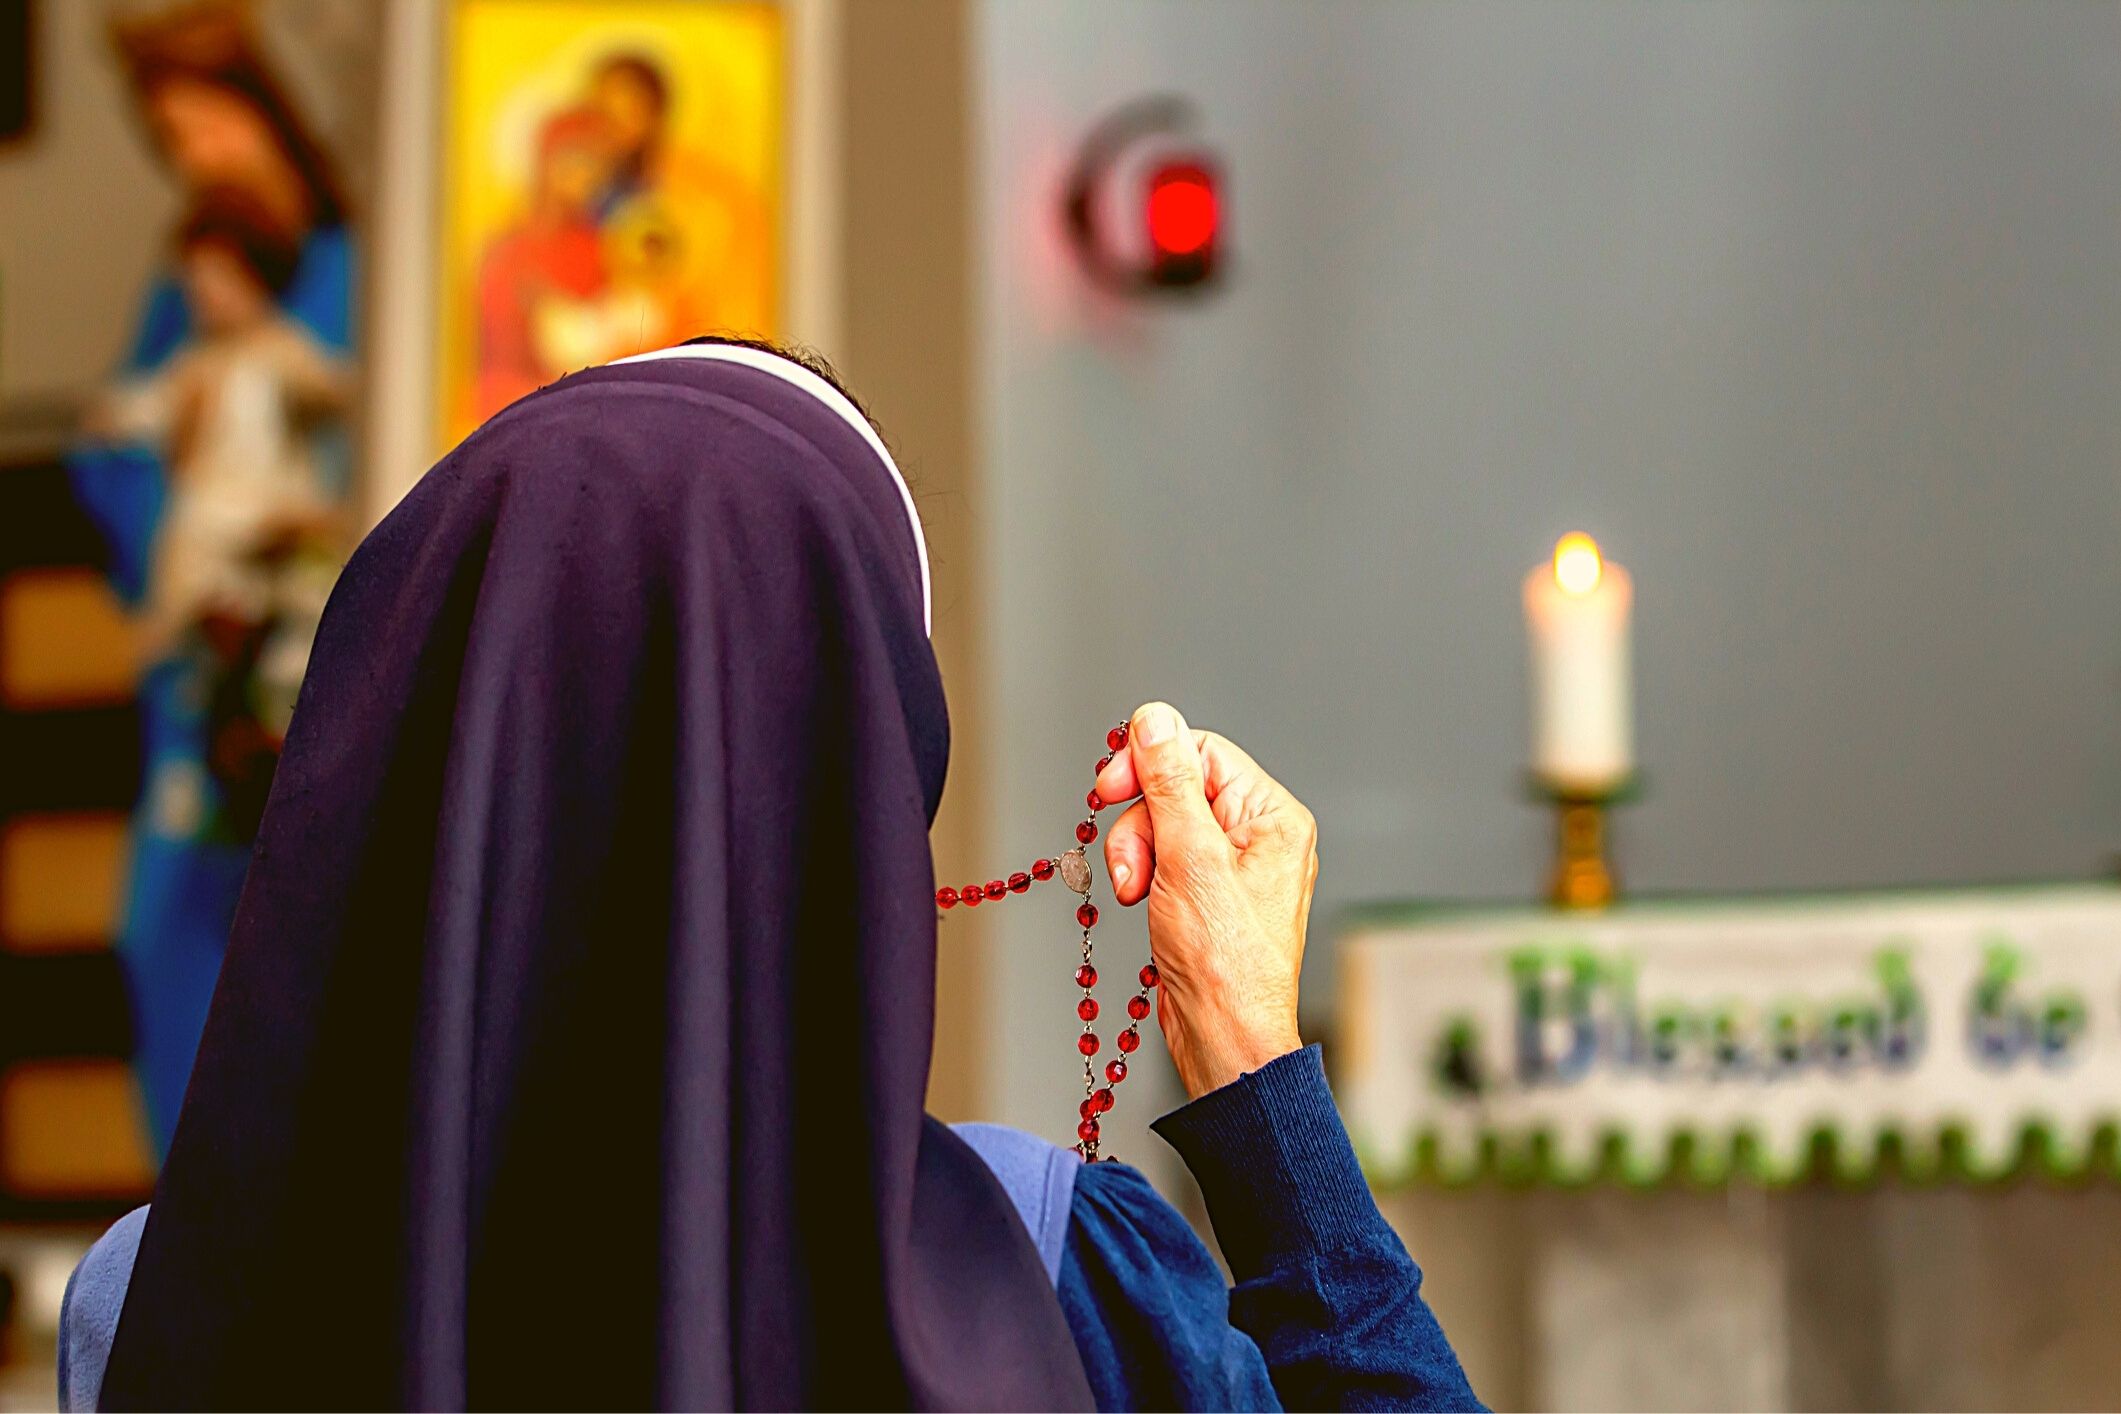 ‘I have sinned’: 80-year-old Nun jailed for stealing money for gambling